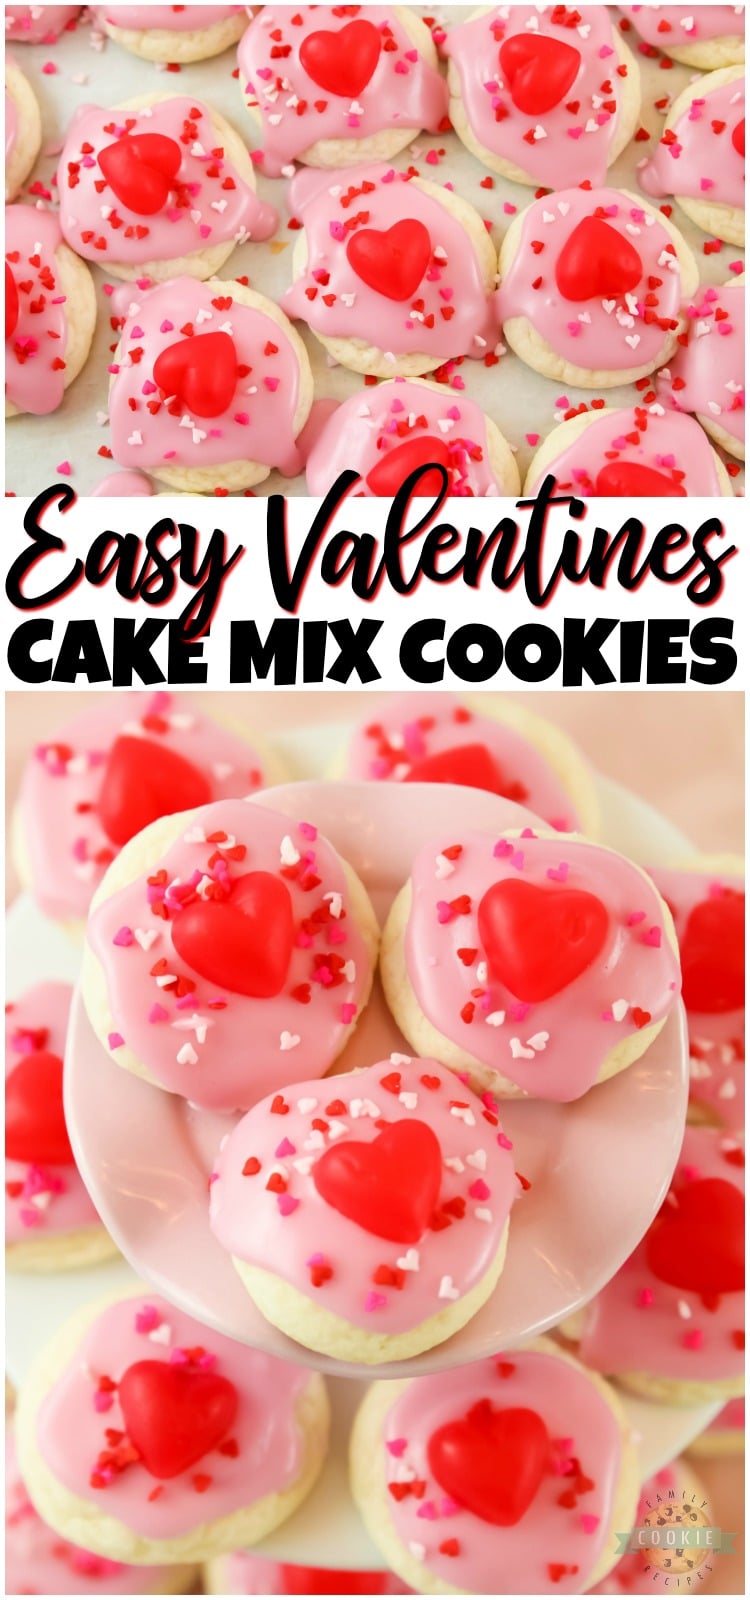 Valentines Cake Mix Cookies made with just 3 ingredients in under 30 minutes! Quick & Easy Valentines dessert recipe for your special someone! #Valentines #cookies #baking #frosting #sprinkles #ValentinesDay #recipe from FAMILY COOKIE RECIPES via @buttergirls